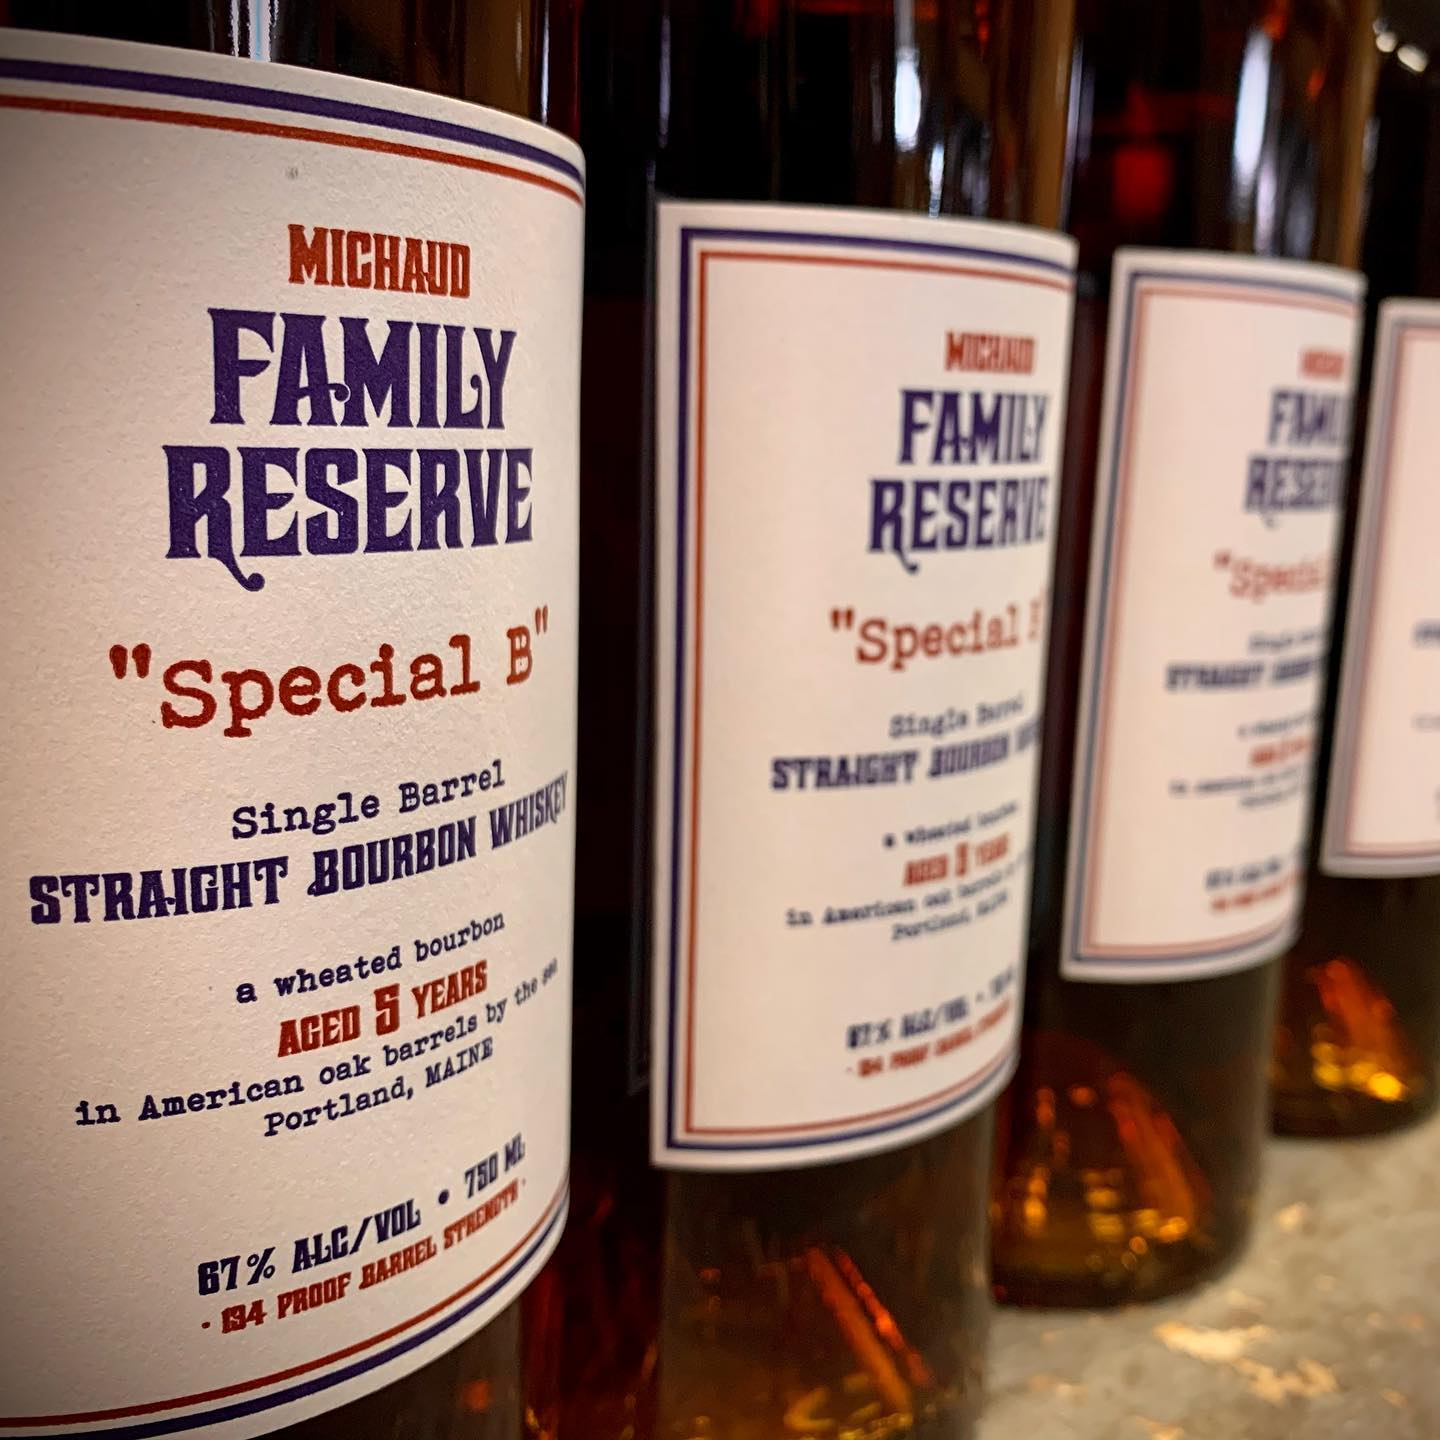 Family Reserve "Special B" Straight Bourbon